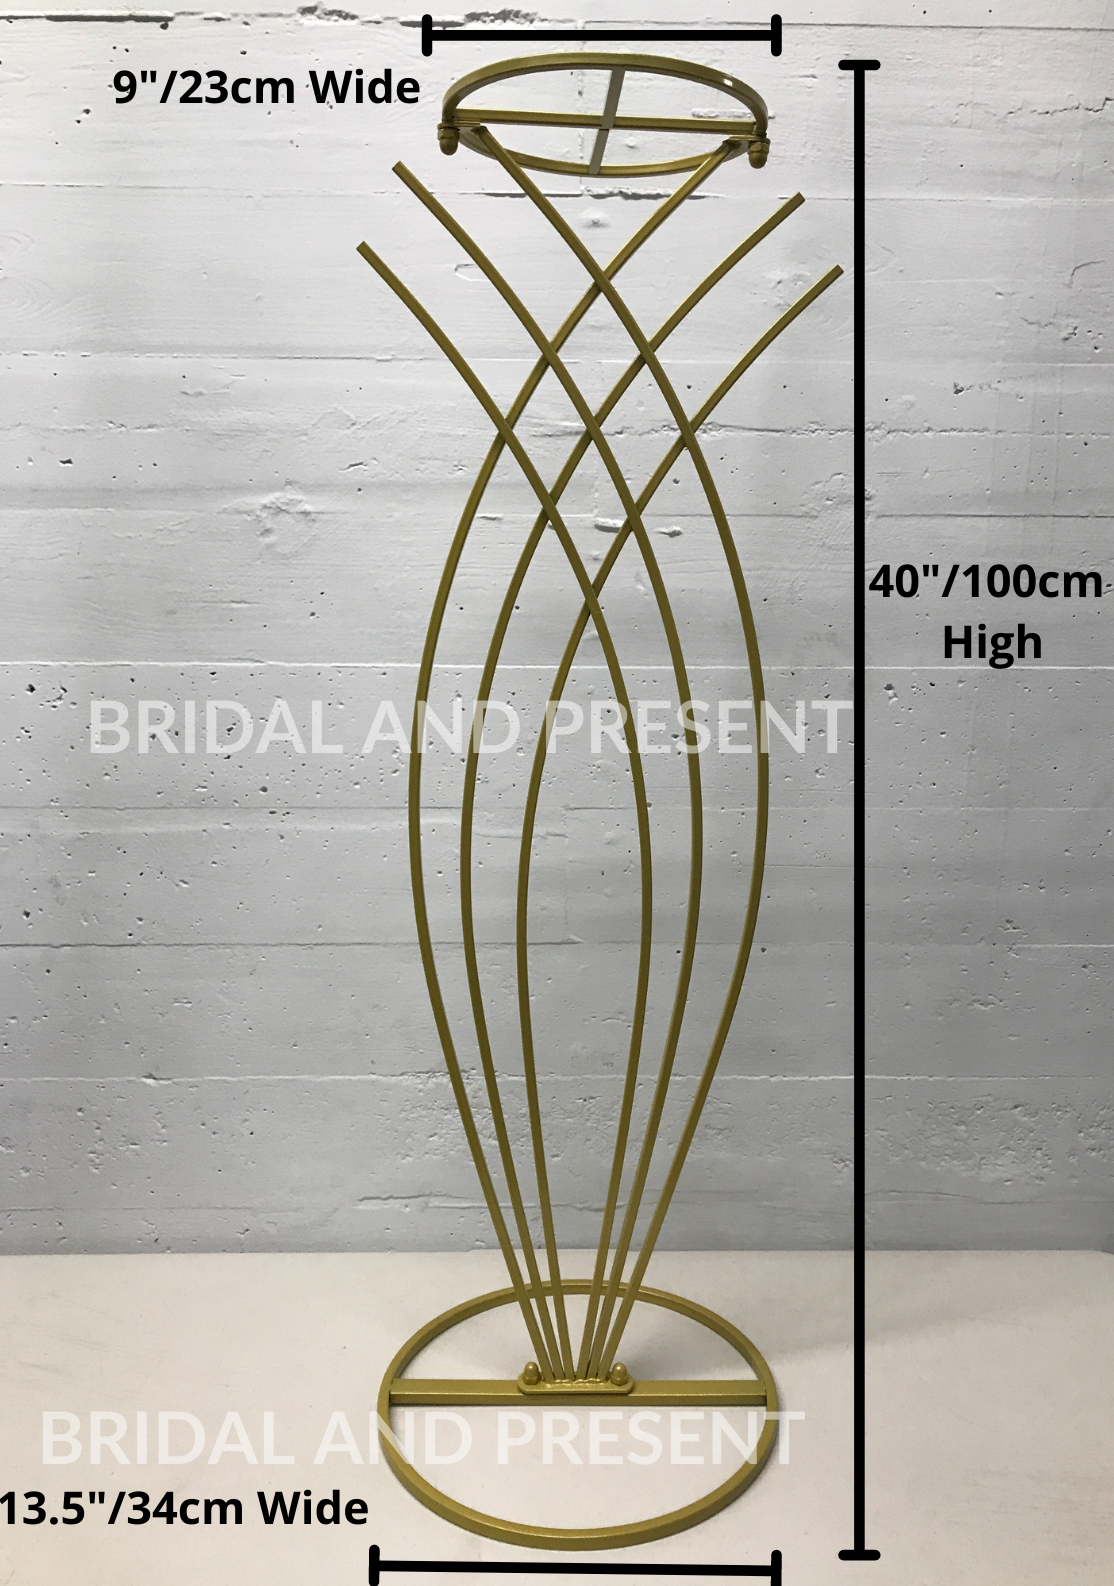 Tall Vase Decor Gold Centerpieces For Table Wedding Geometric Metal Flower  Stands For Centerpiece Tables Metalllic Tall Risers Fors Tabletop Arra  Make435 From Imakeweddingprops, $29.25